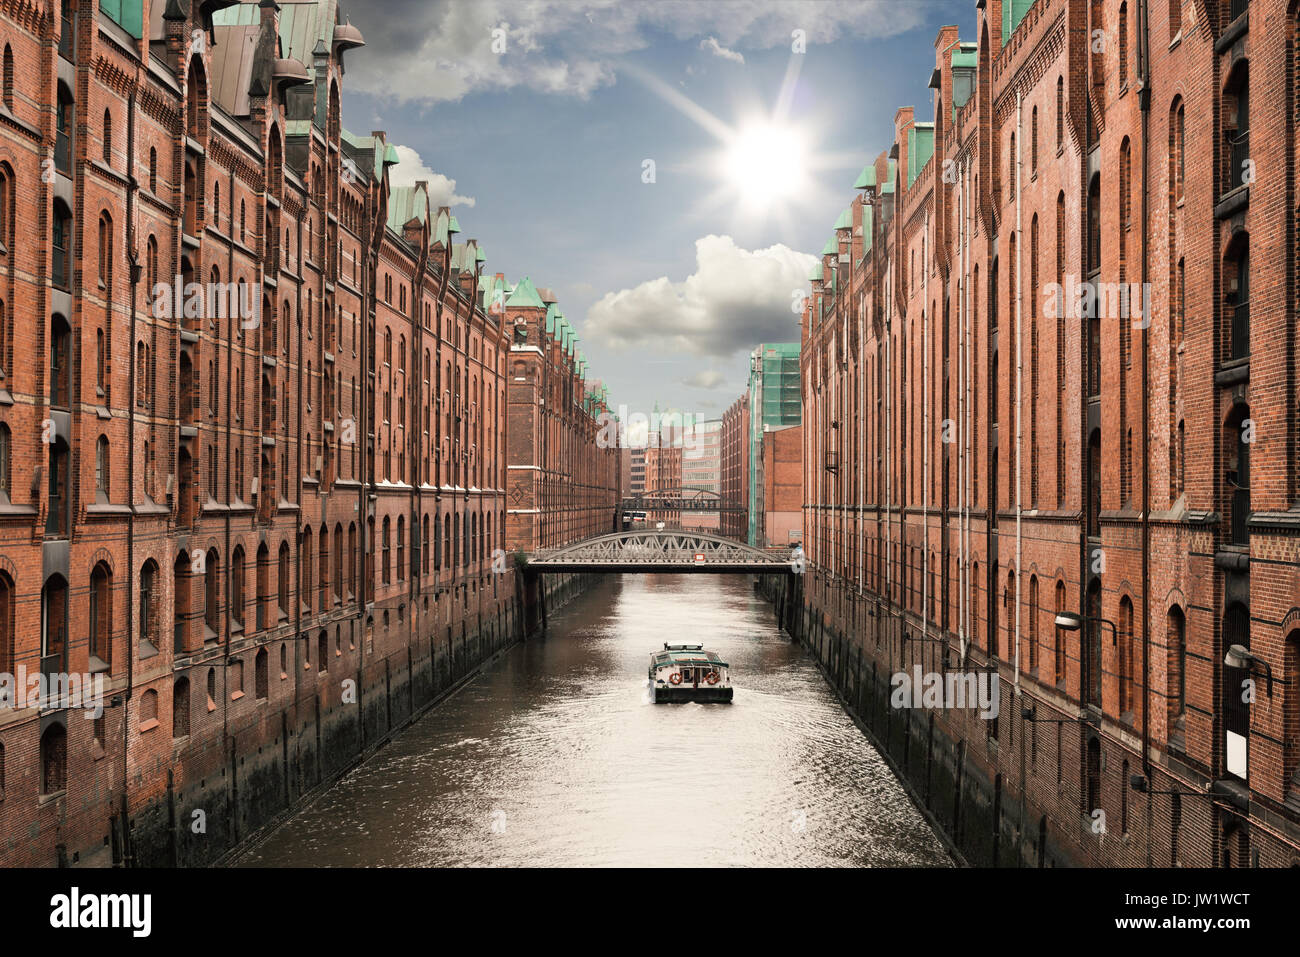 boat on a channel in the old warehouse district Speicherstadt in Hamburg, Germany under sunny blue sky Stock Photo